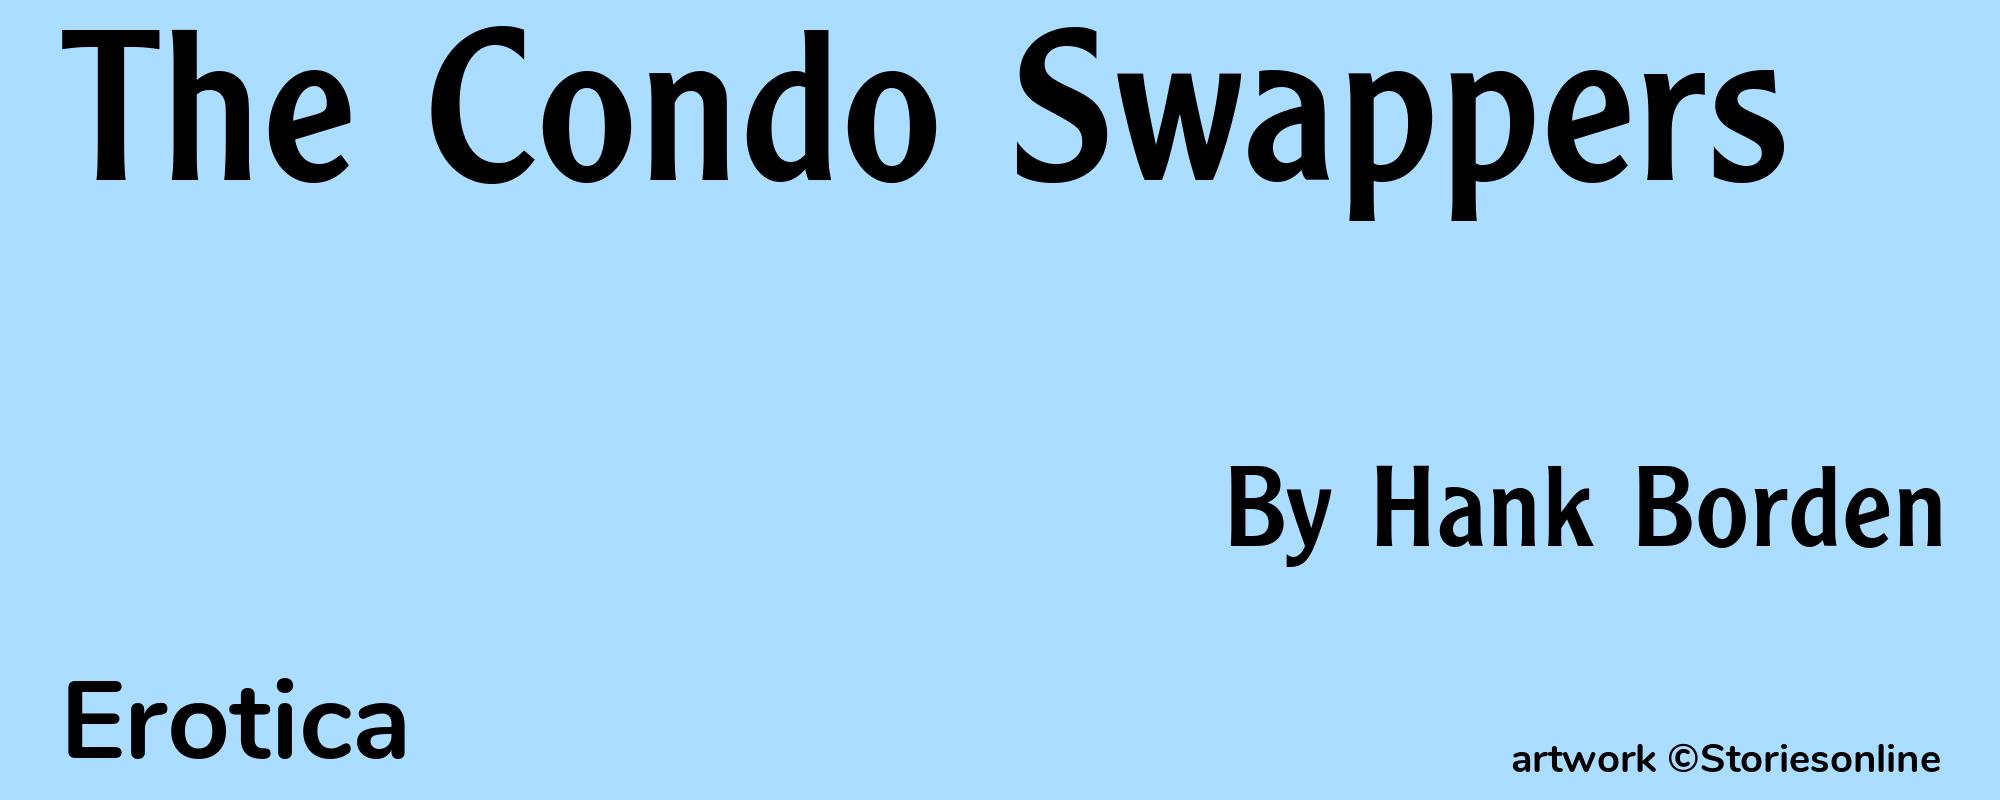 The Condo Swappers - Cover